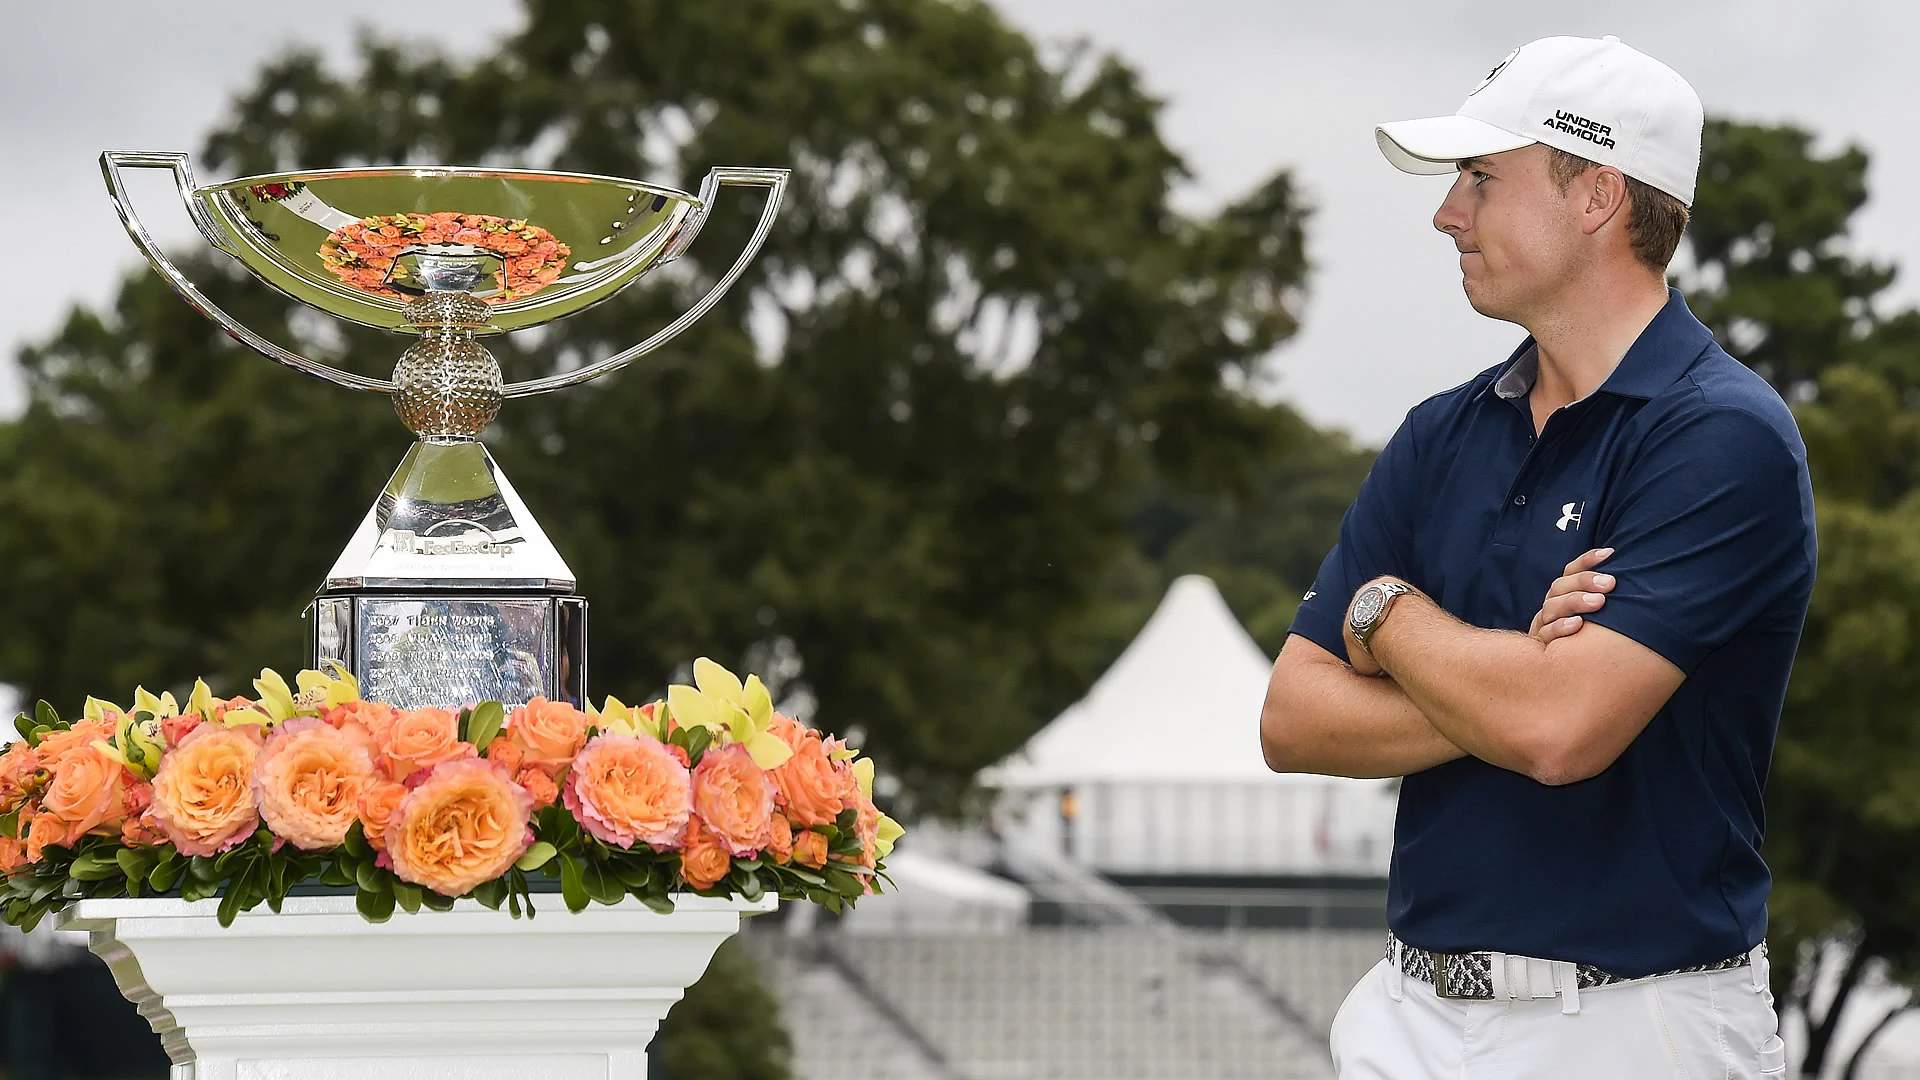 Spieth's FEC prep? Early dinners and couch time